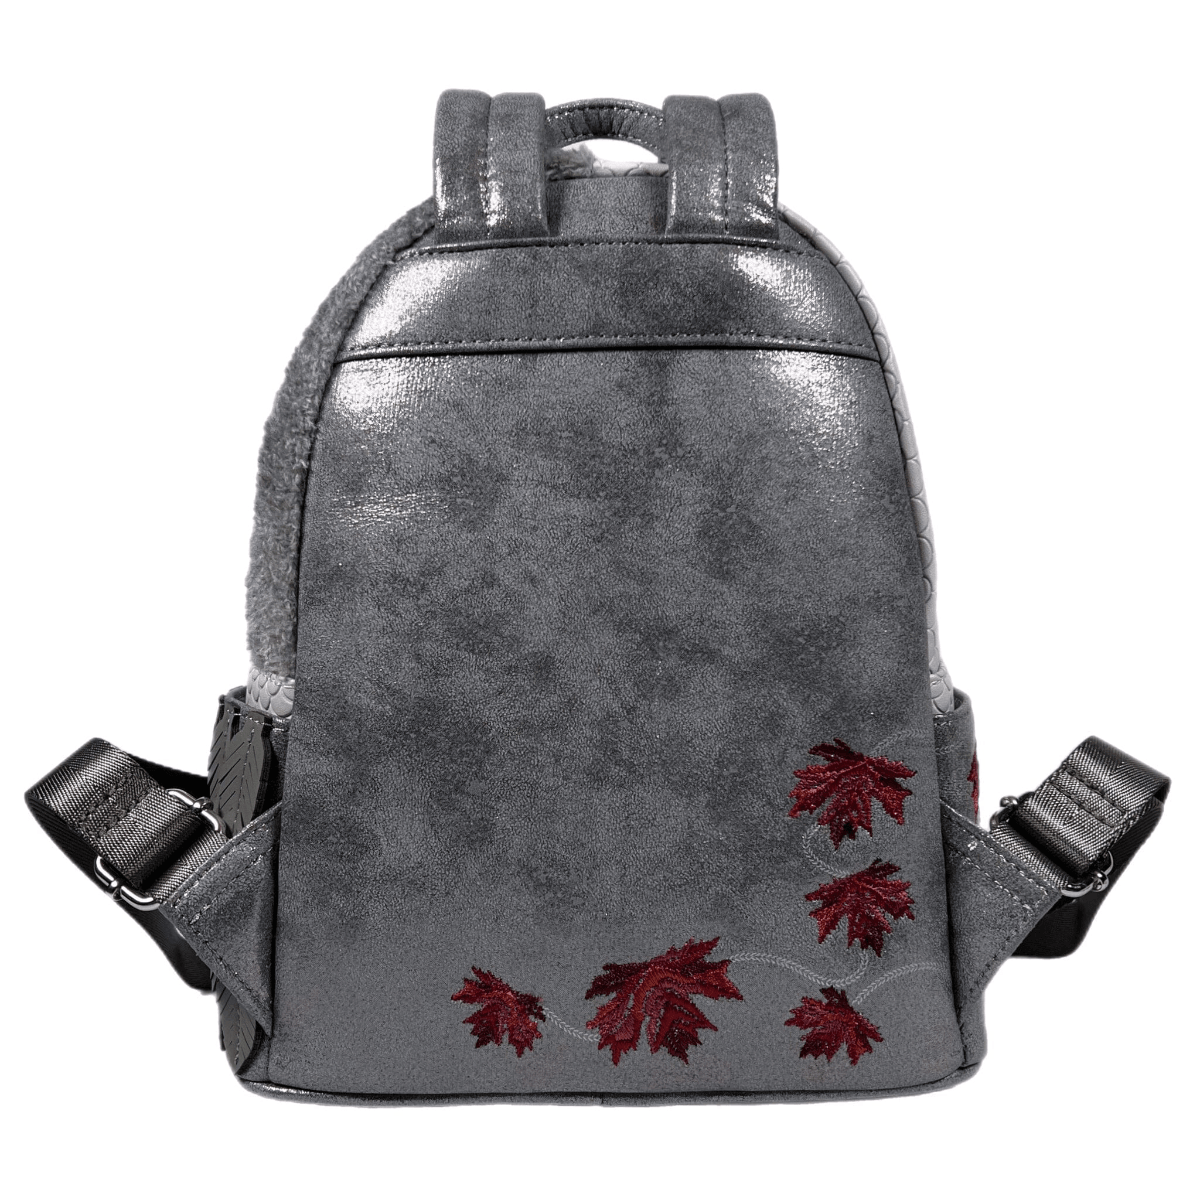 Game of Thrones - Sansa, Queen in the North US Exclusive Mini Backpack [RS] Backpack by Loungefly | Titan Pop Culture